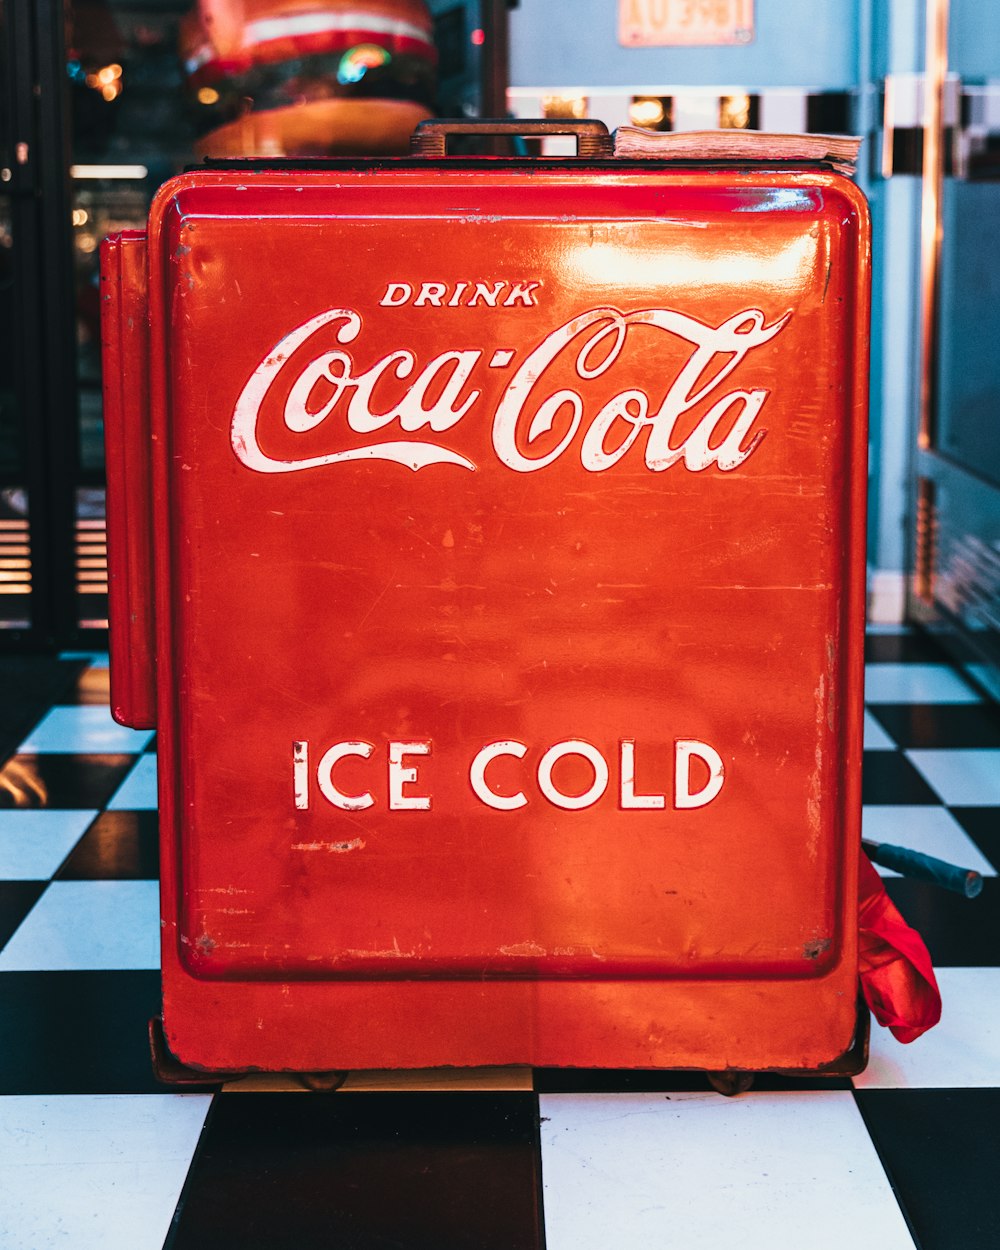 red Coca-Cola ice cold container